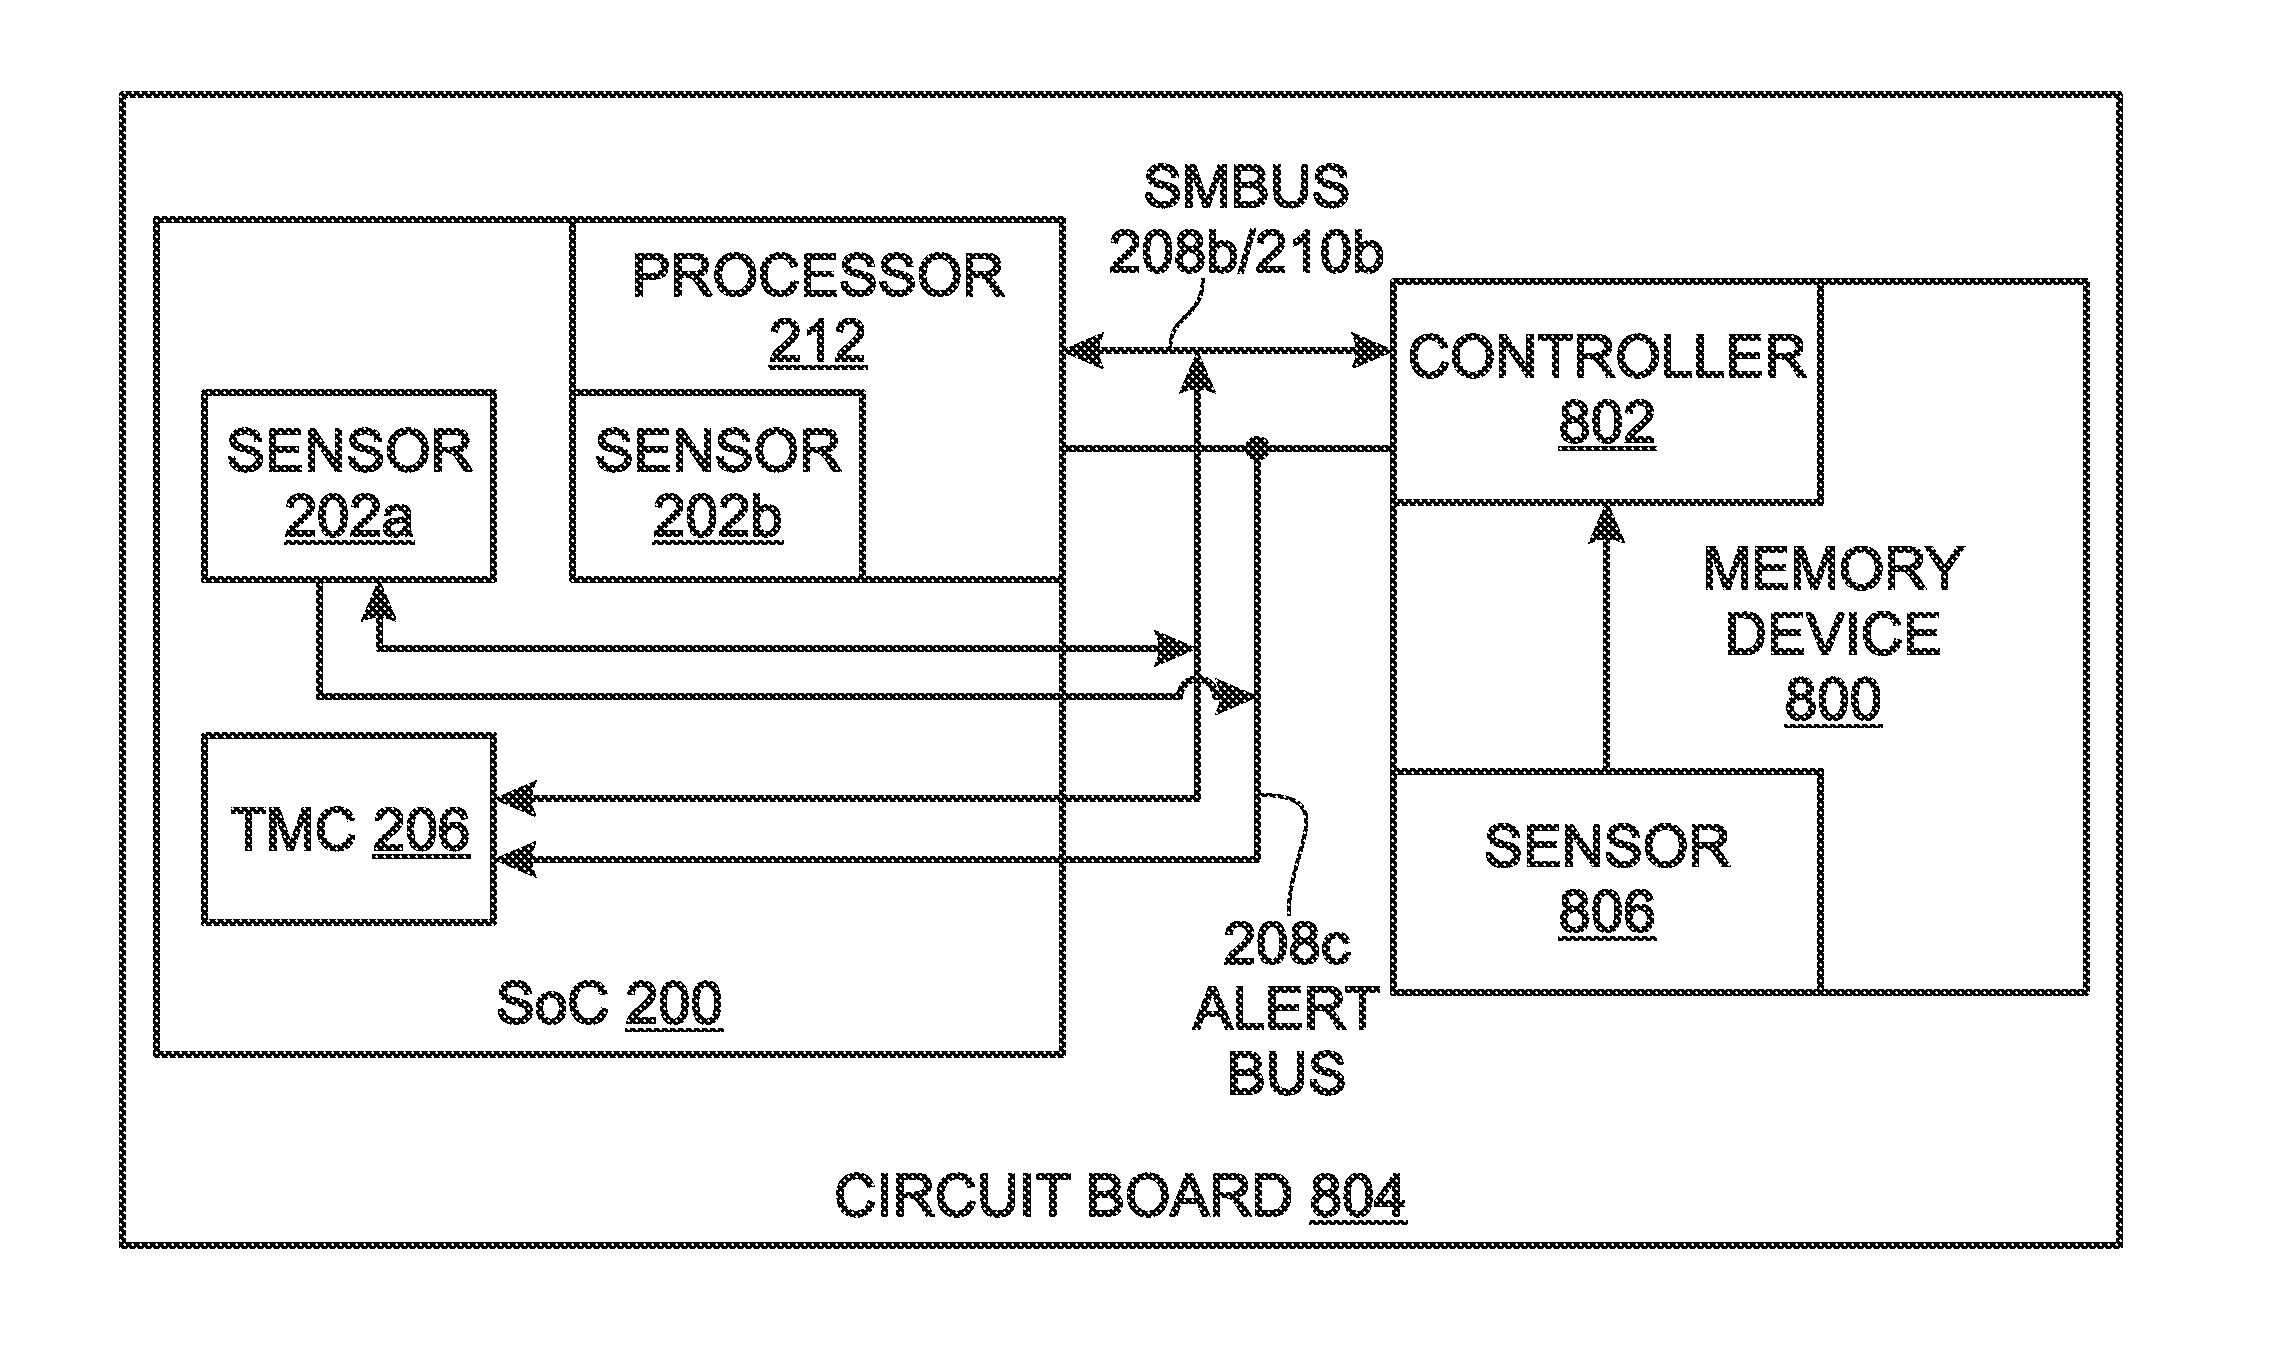 System-on-chip with thermal management core